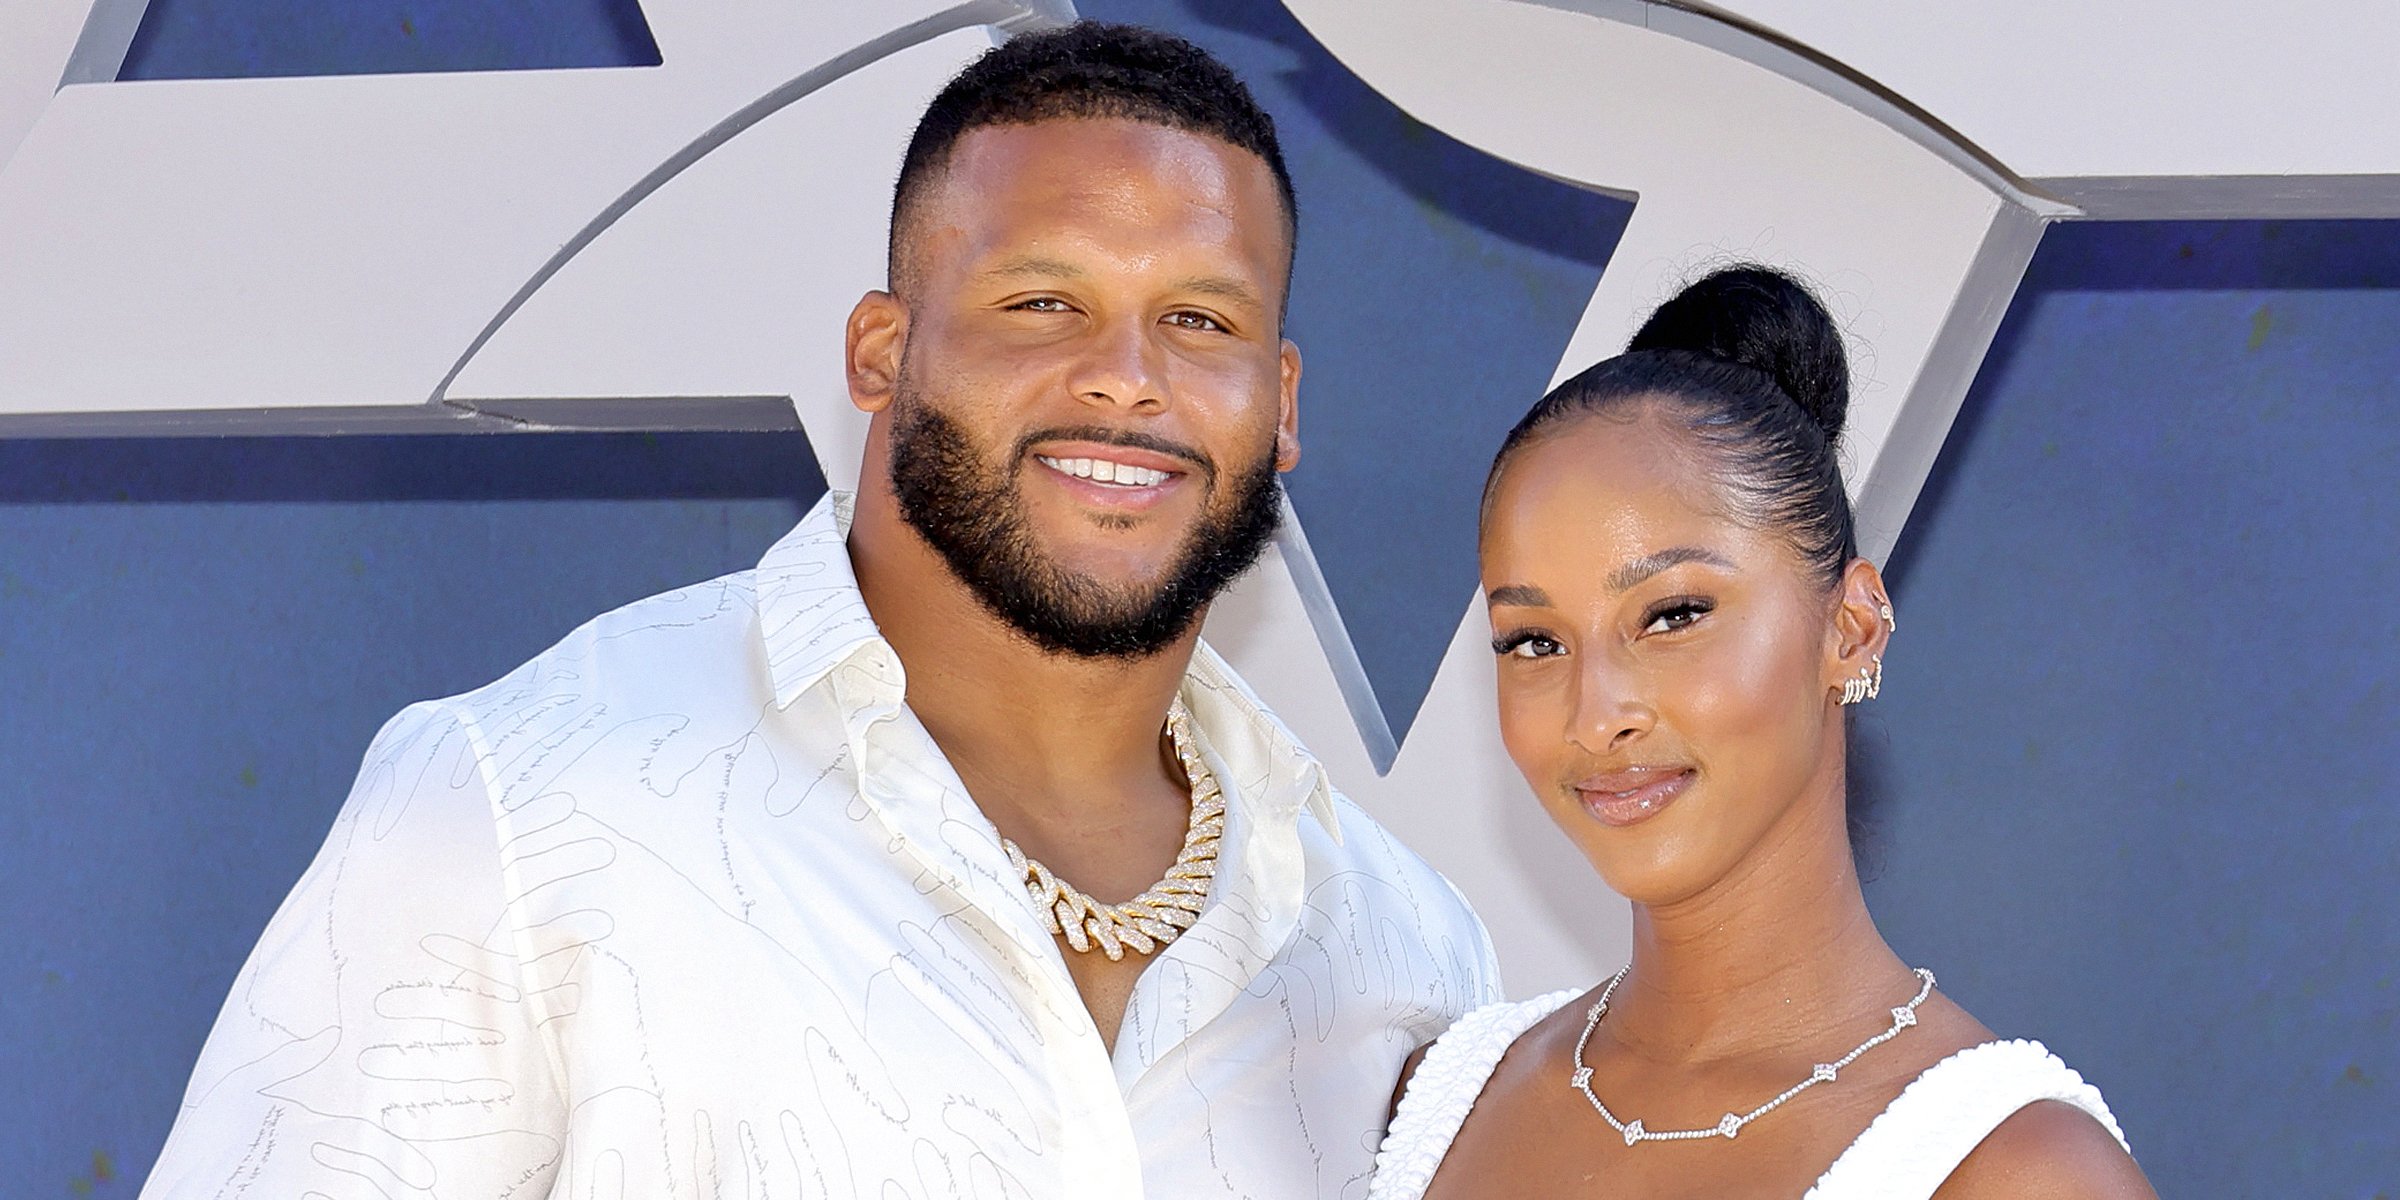 Aaron Donald and wife Erica. | Source: Getty Images